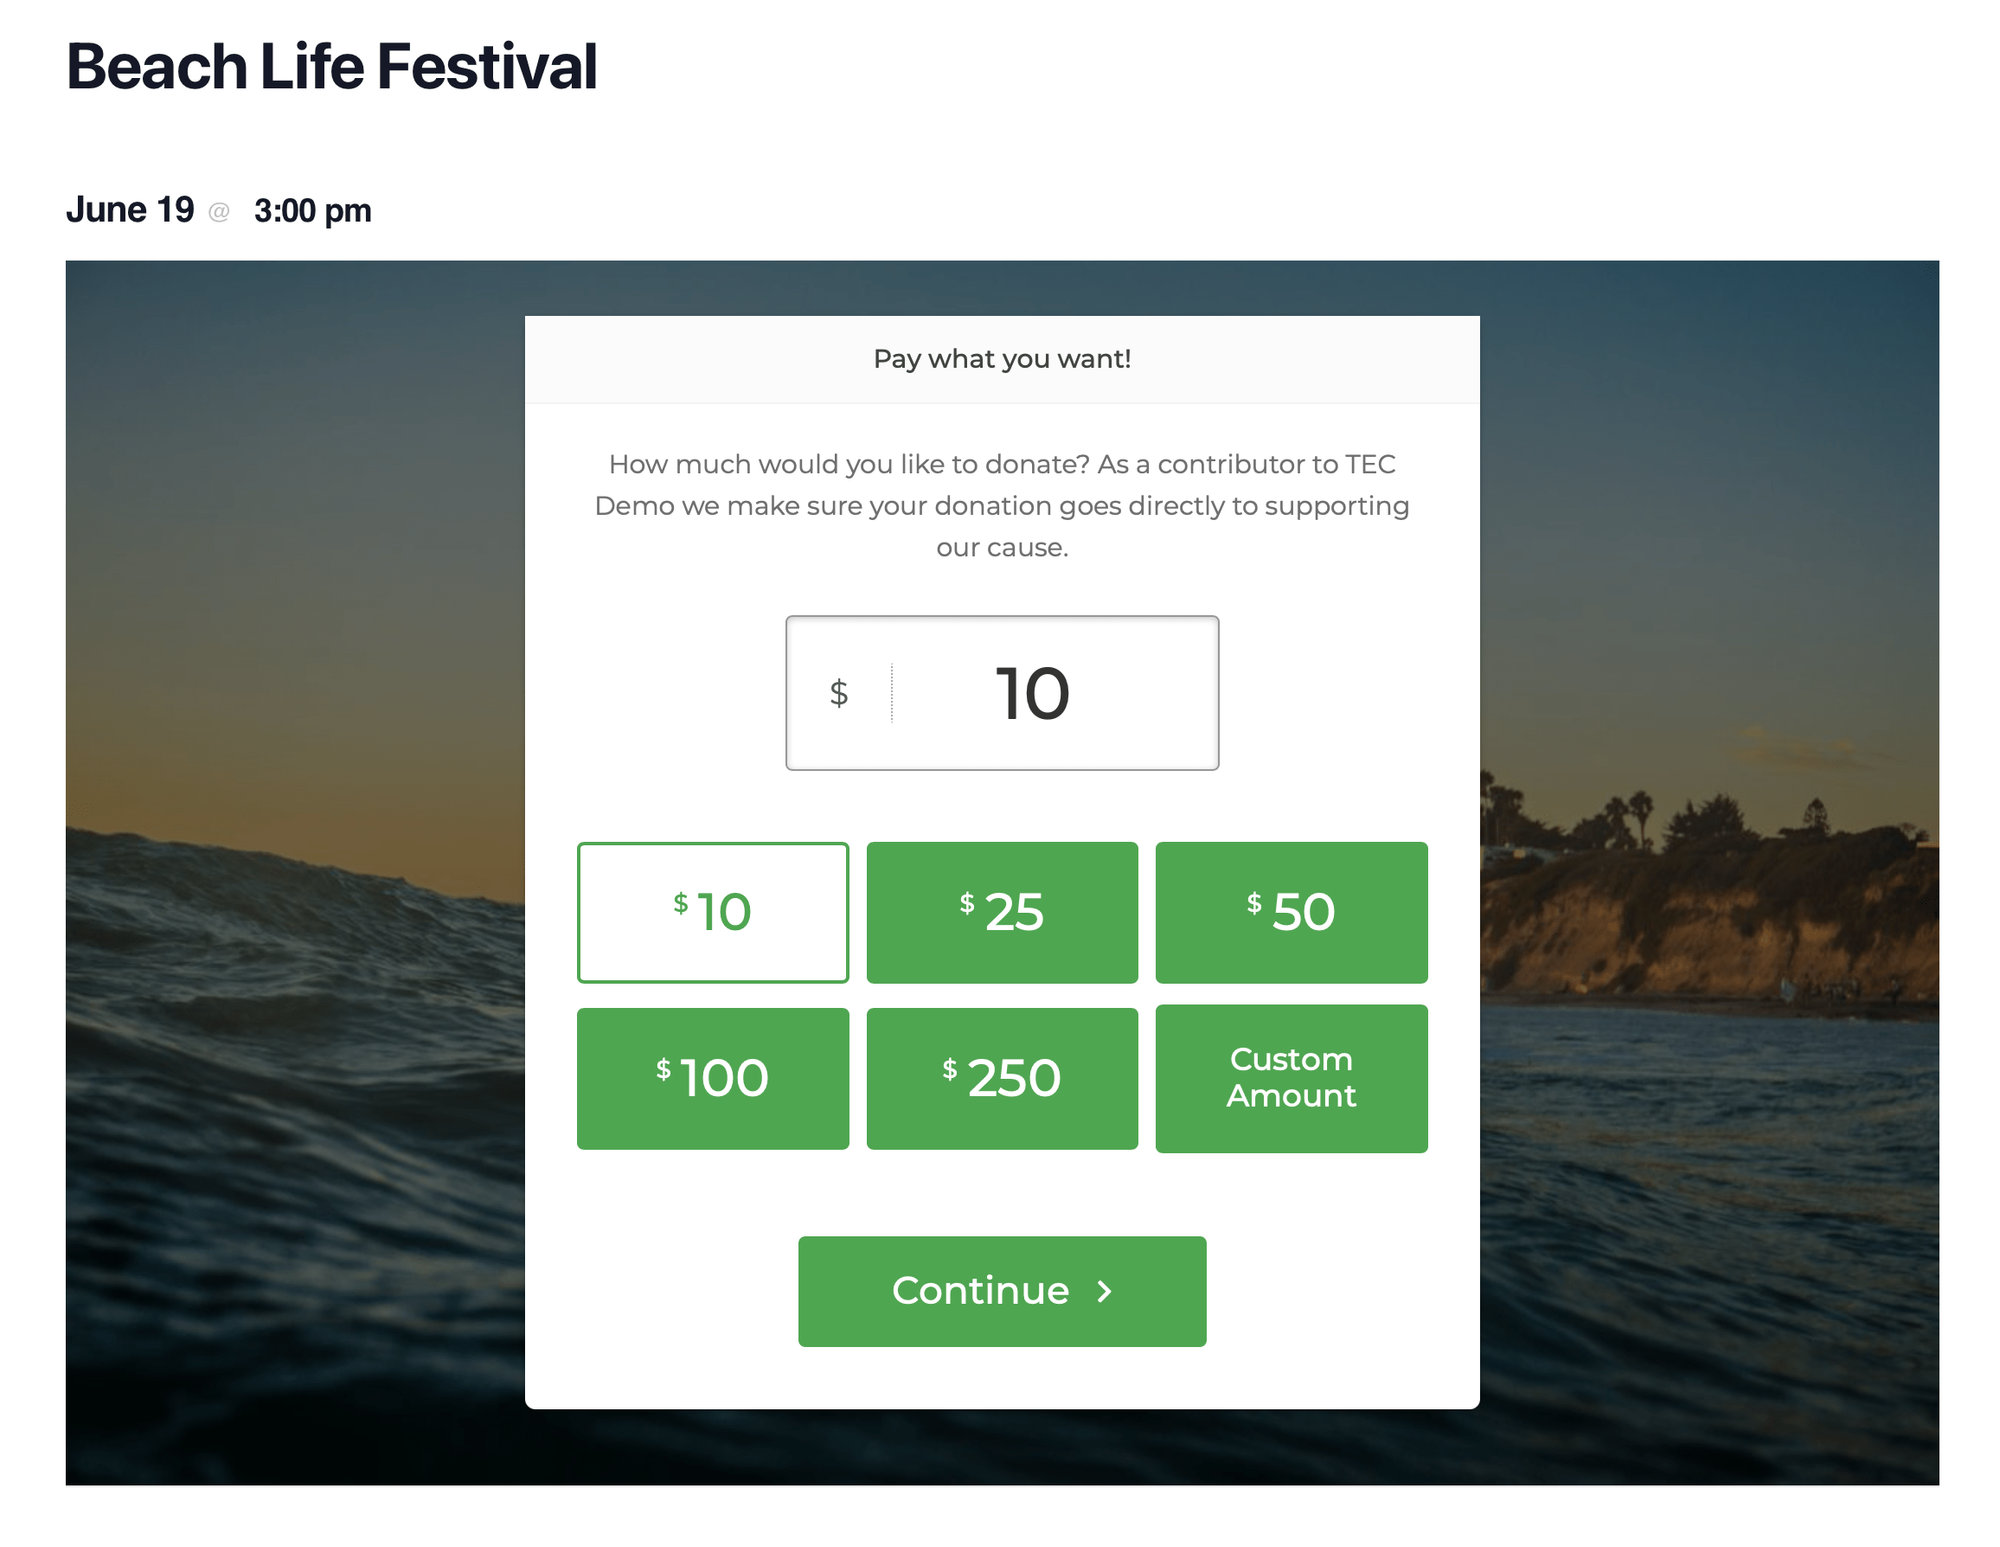 Showing the embedded donation form on the front end of the event post. The form is embedded on top of the Cover block which has a background image of an ocean wave. The form says Pay What You Want with donation amount options displayed as green buttons, with ten dollars as the default option.